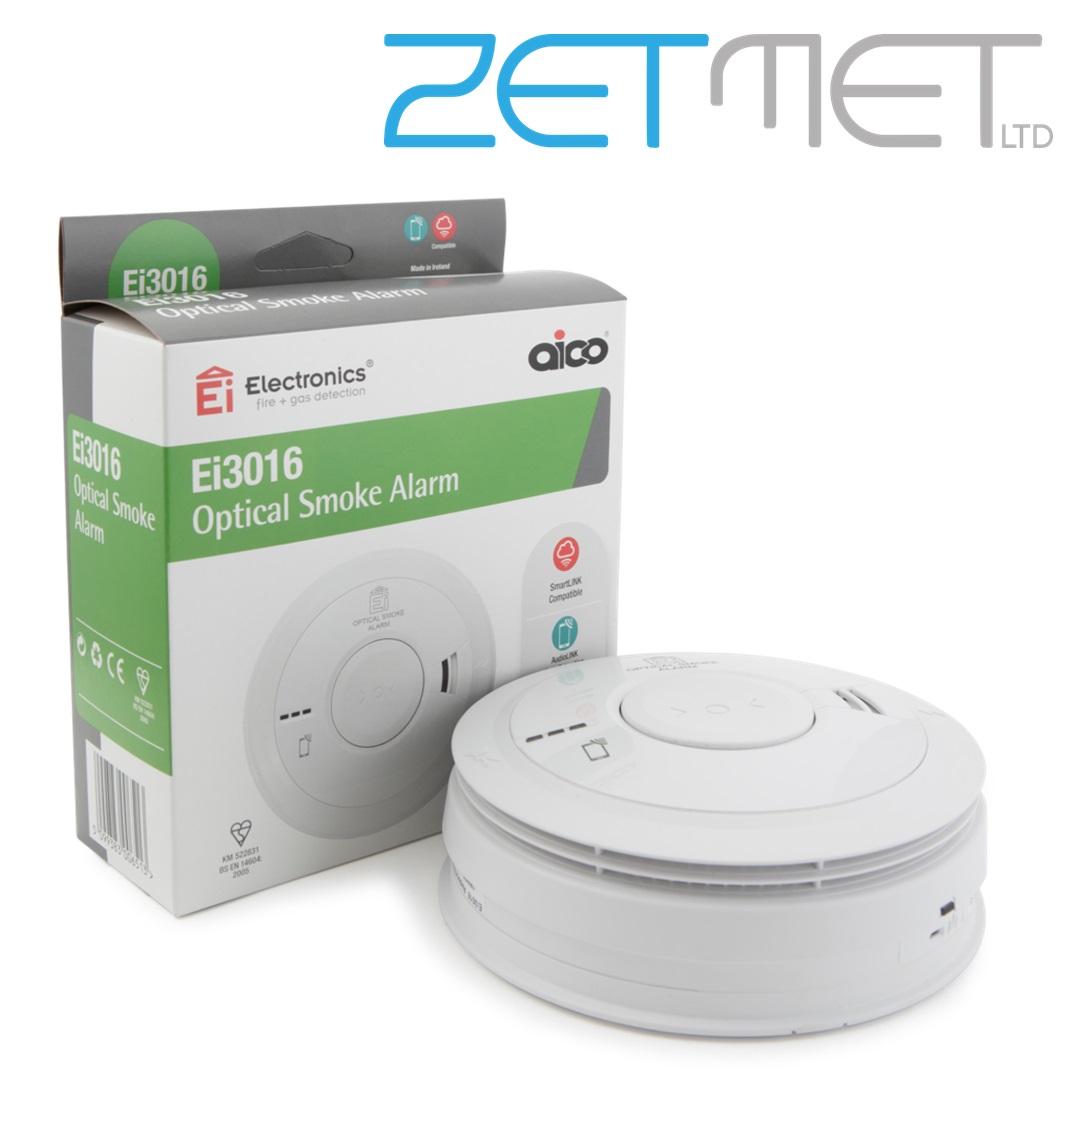 Aico Ei3016 3000 Series White 230V Mains Optical Smoke Alarm with Rechargeable Battery